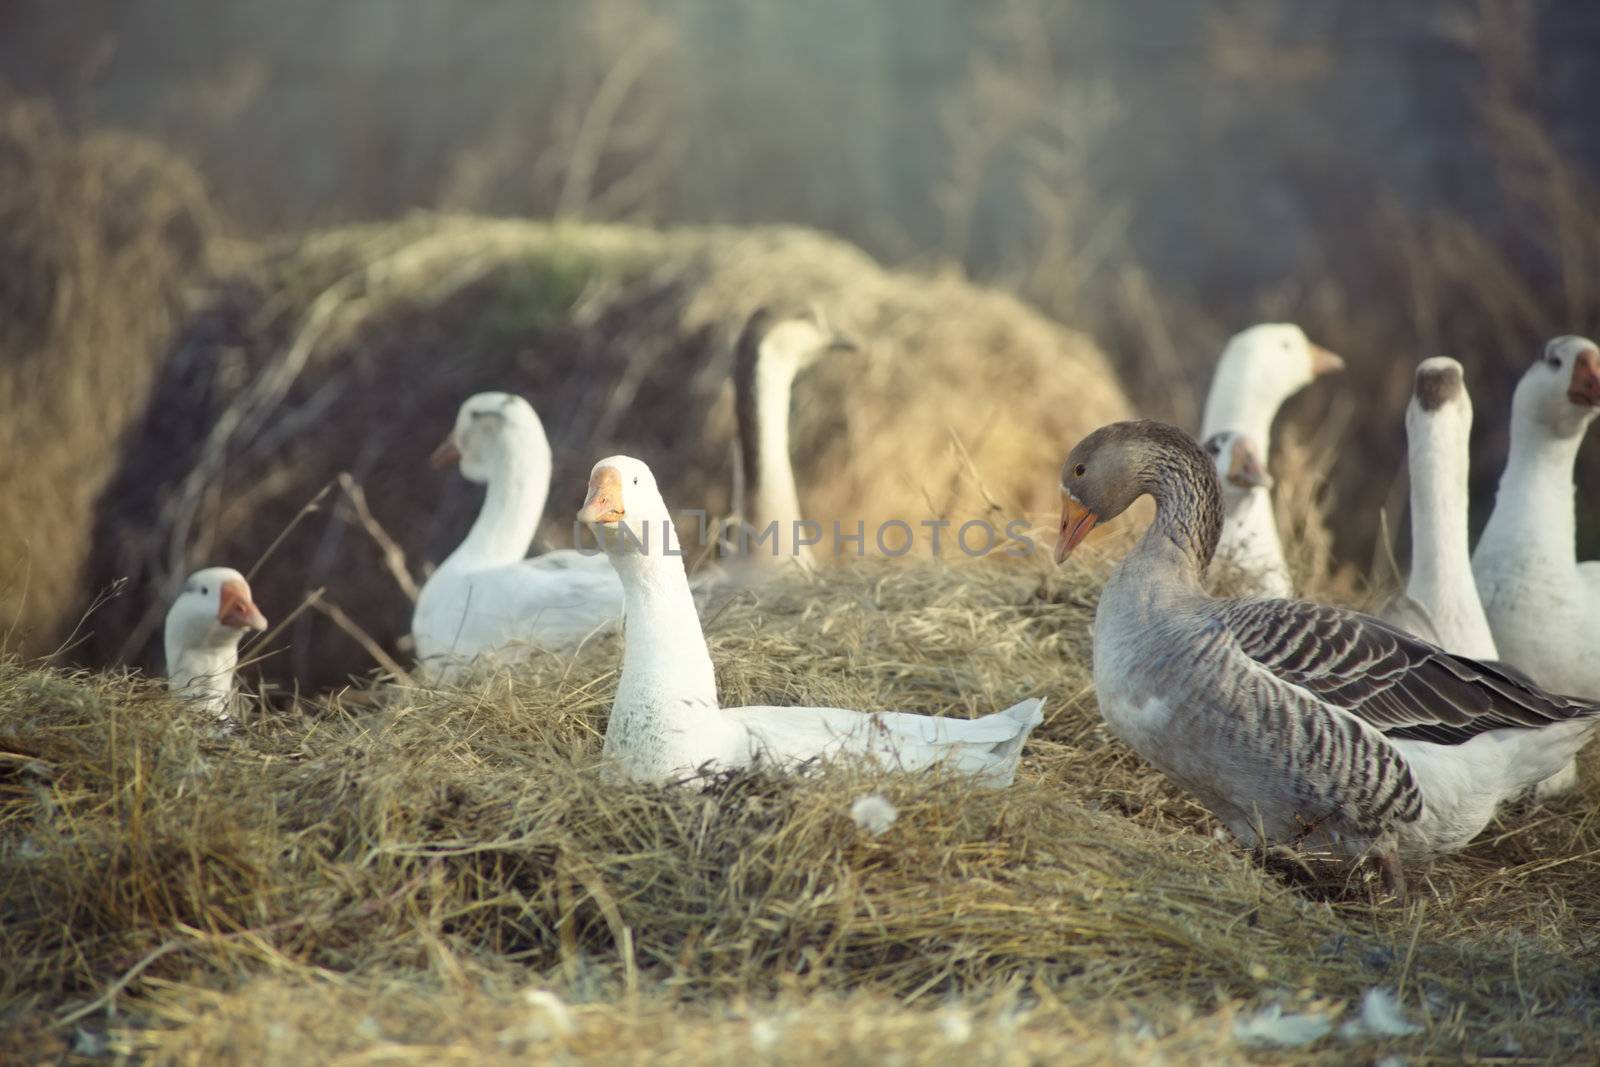 Wild ducks outdoors. Natural light and colors. Shallow depth of field added by telephoto lens for natural view